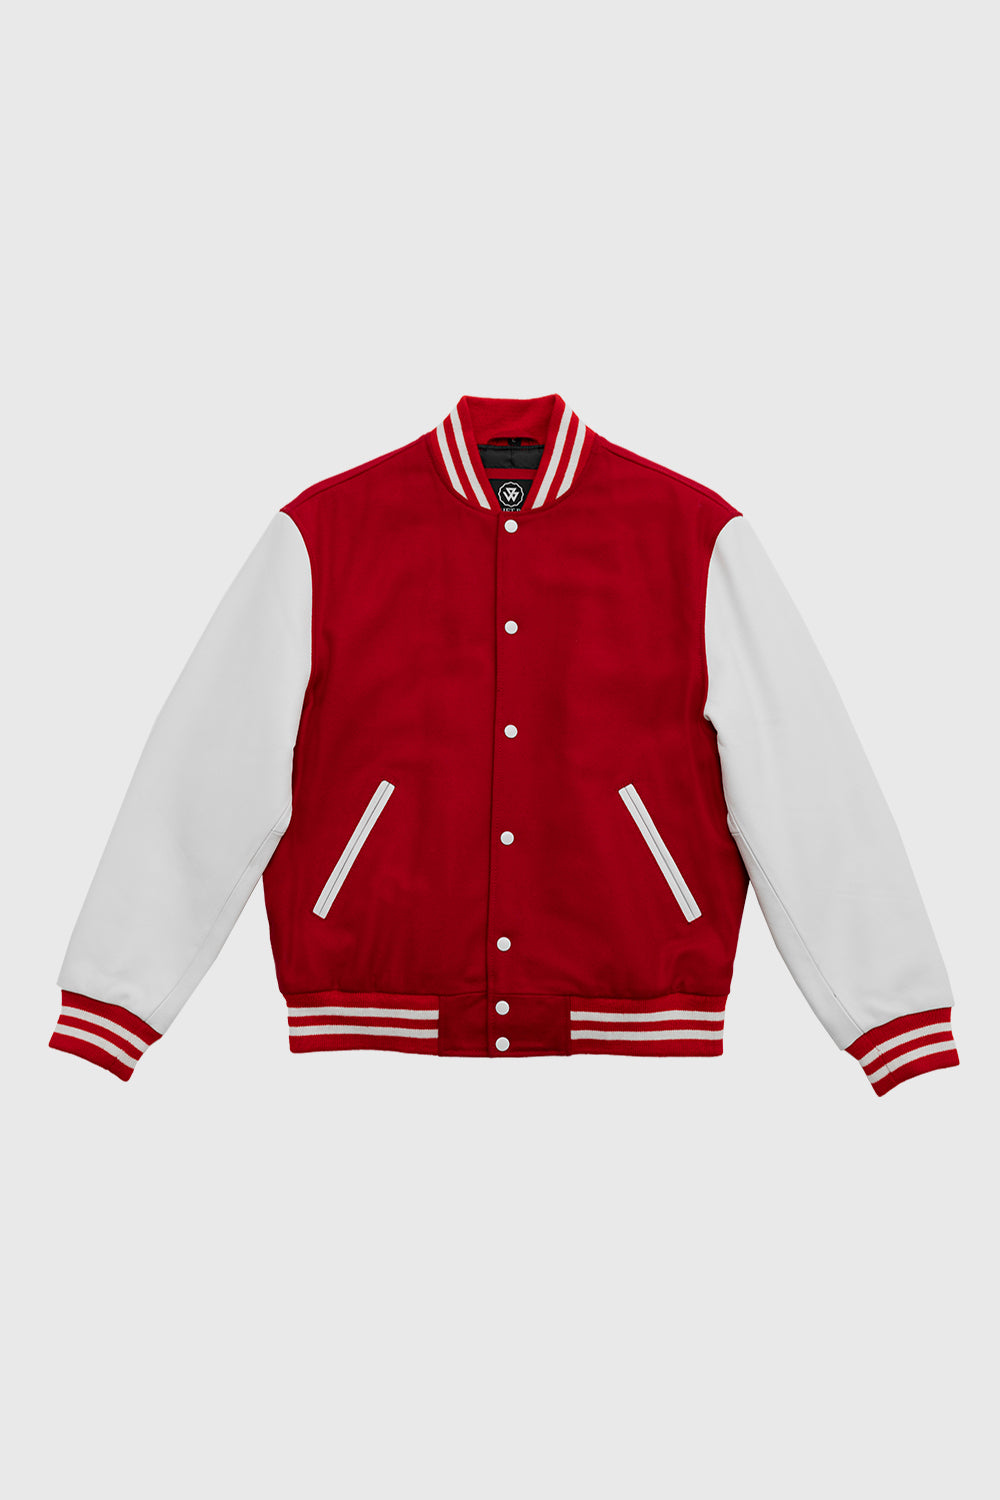 Varsity Red Wool Body/ White Leather Sleeves